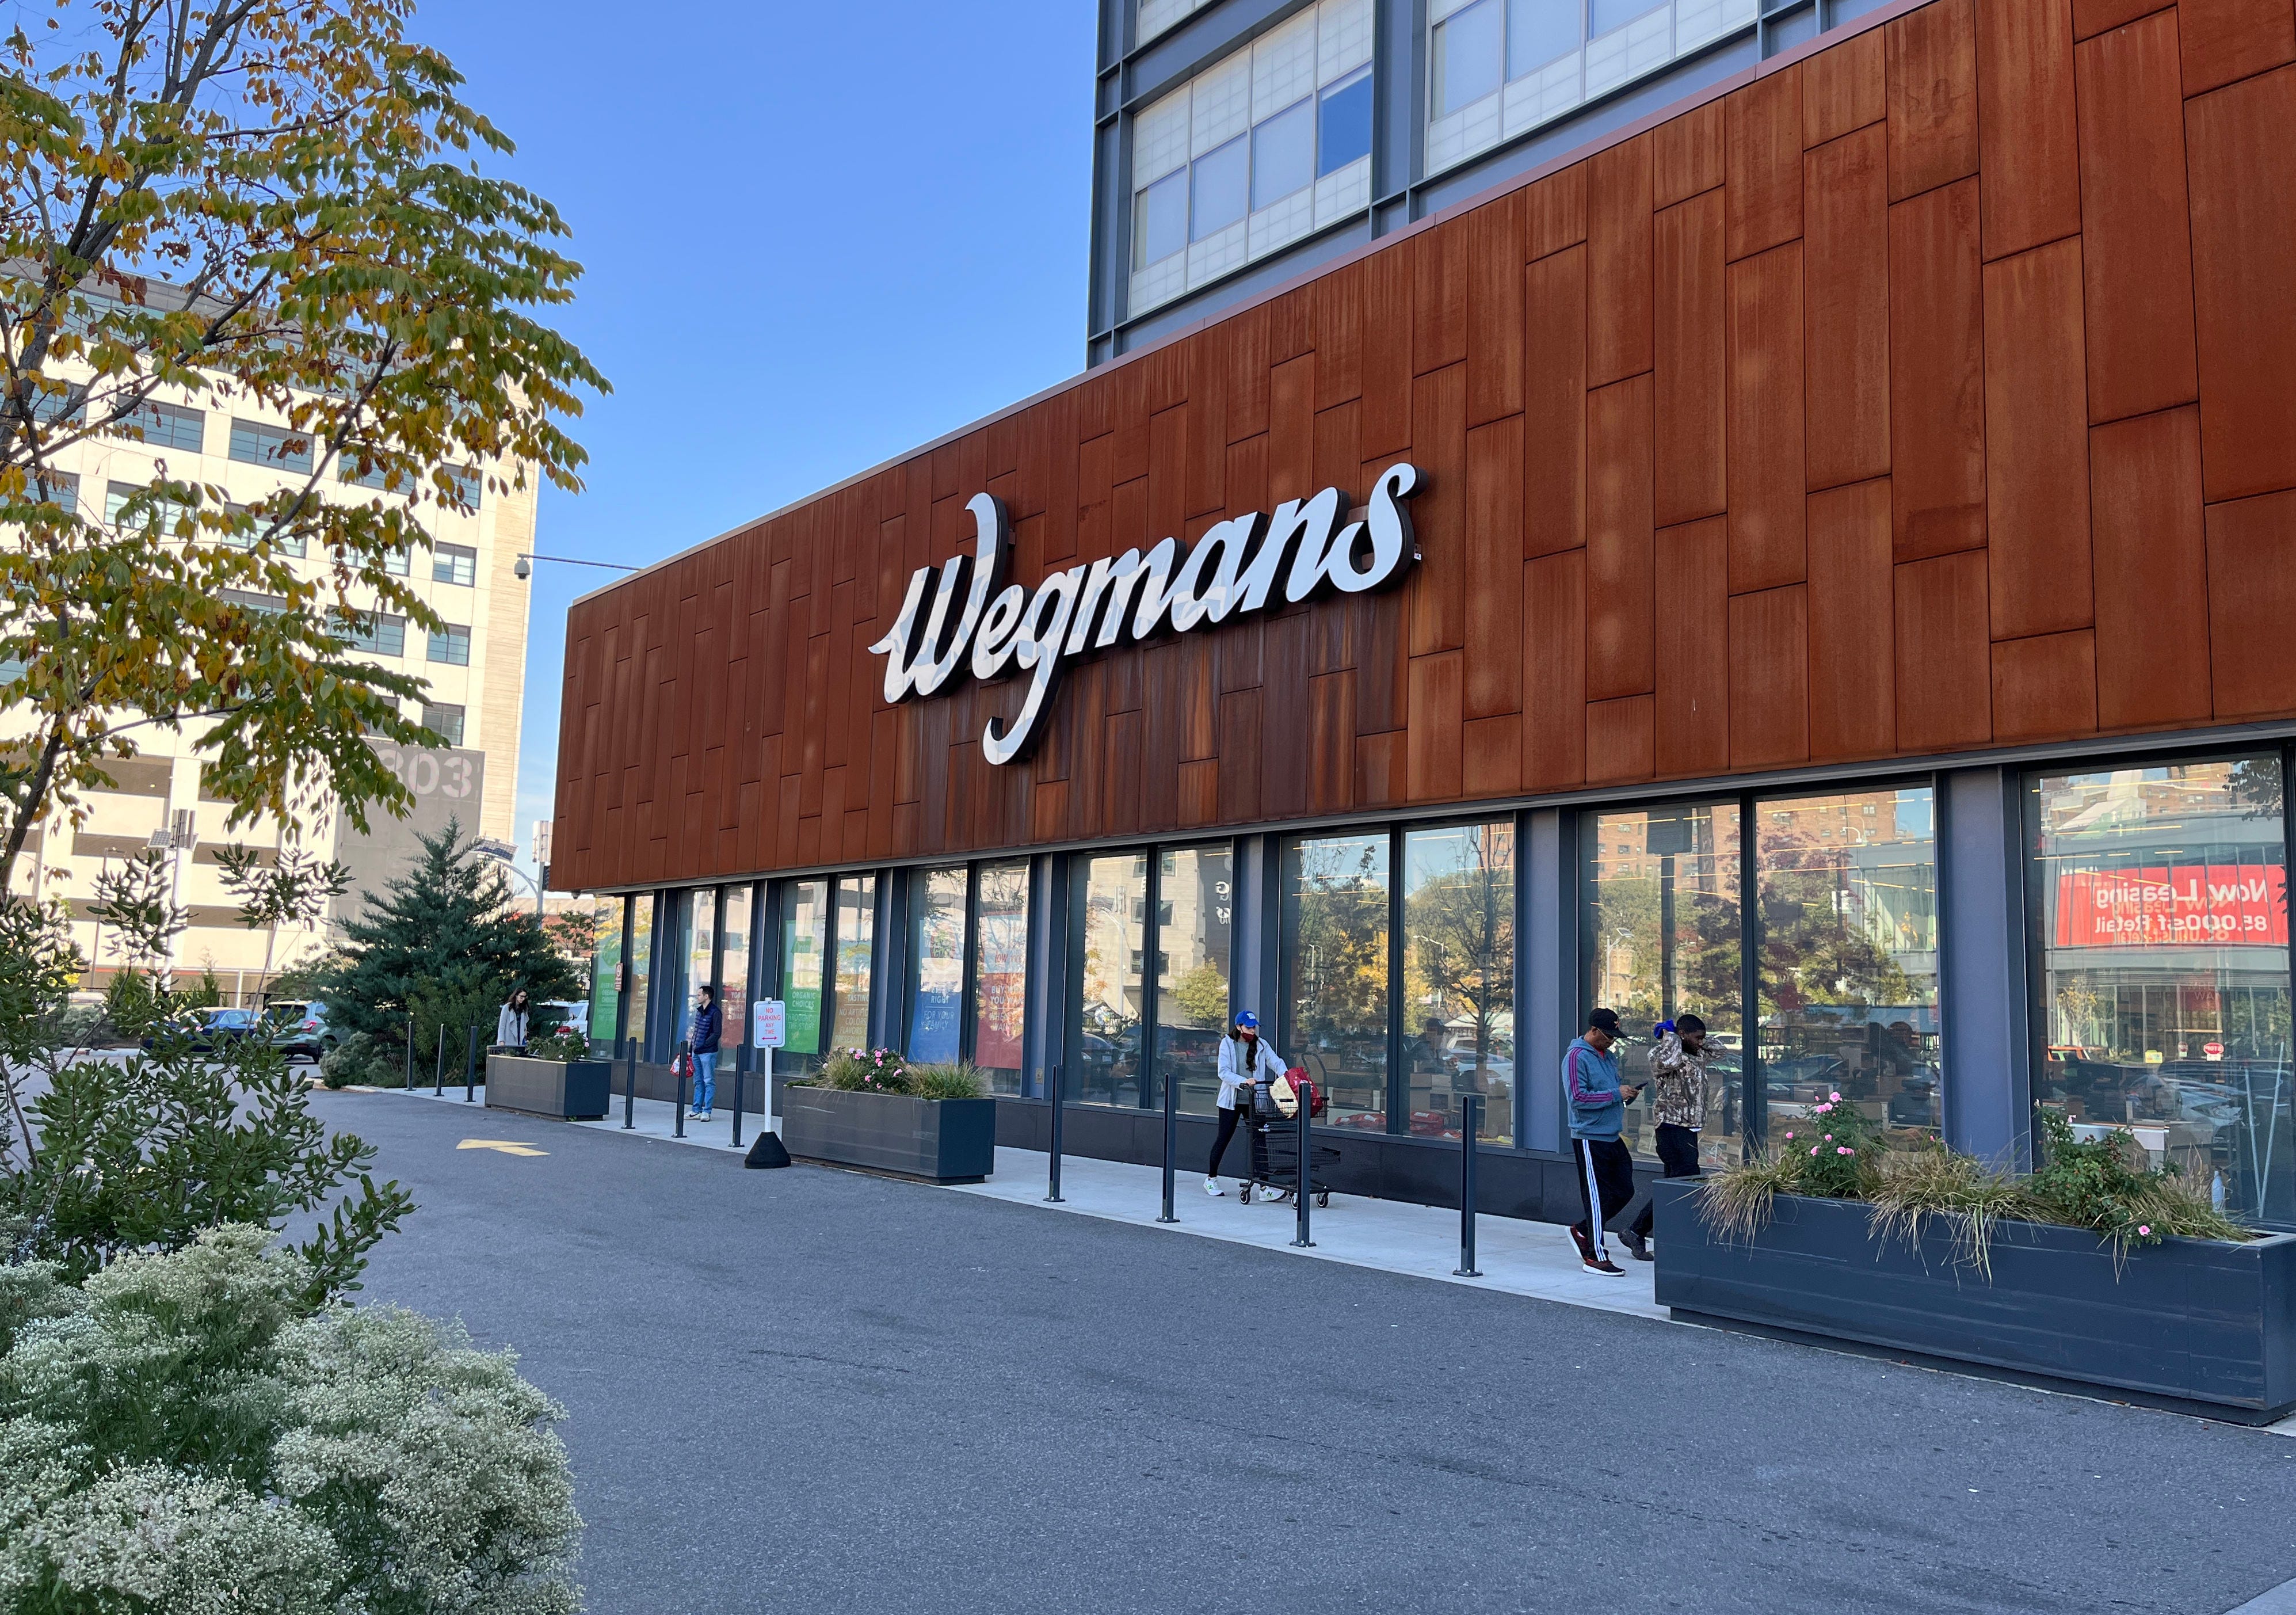 The exterior of the Wegmans on Flushing Avenue in Brooklyn, photographed Oct. 15, 2022.